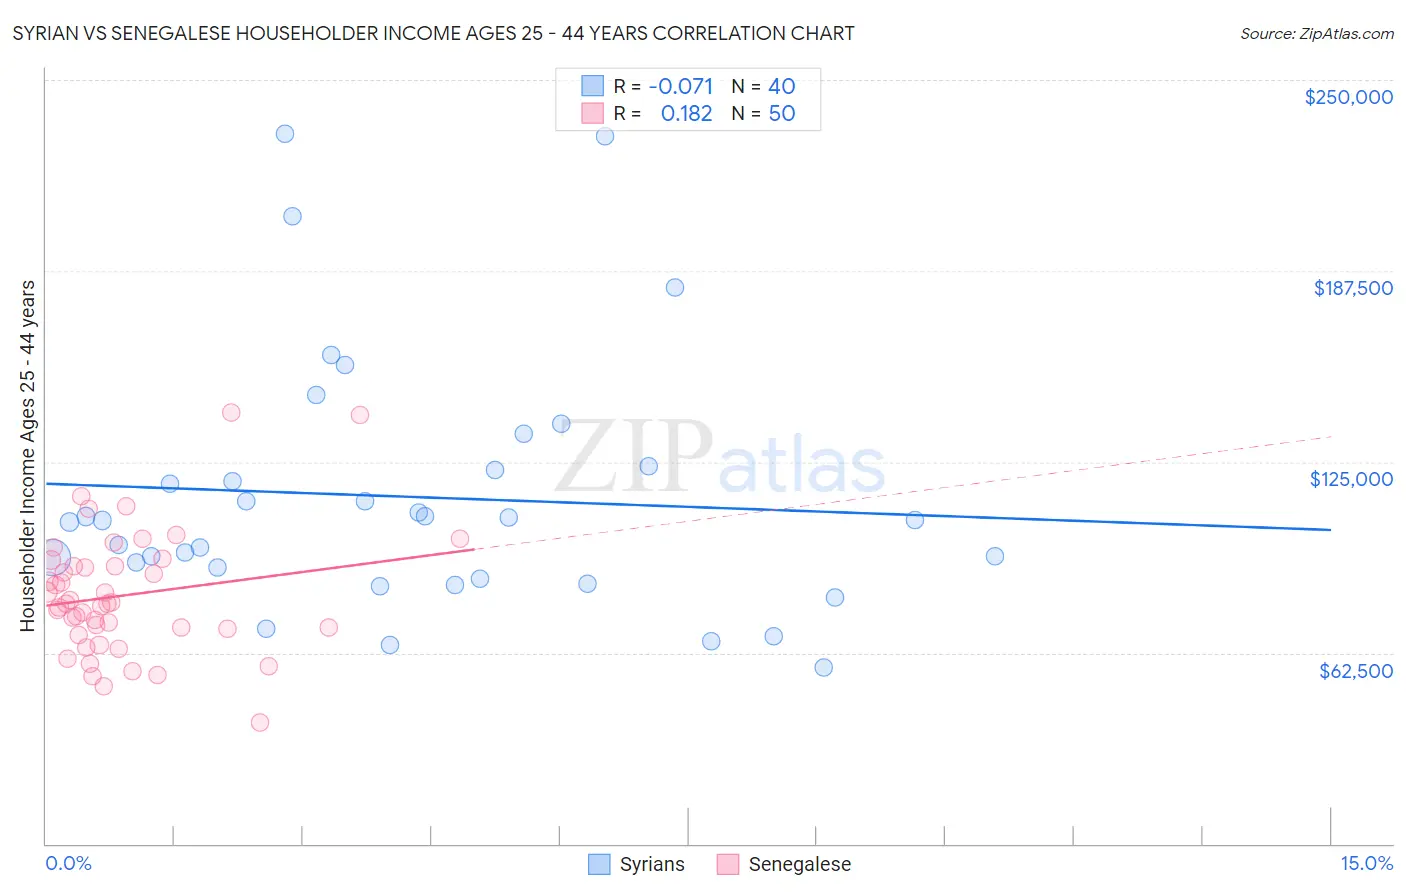 Syrian vs Senegalese Householder Income Ages 25 - 44 years